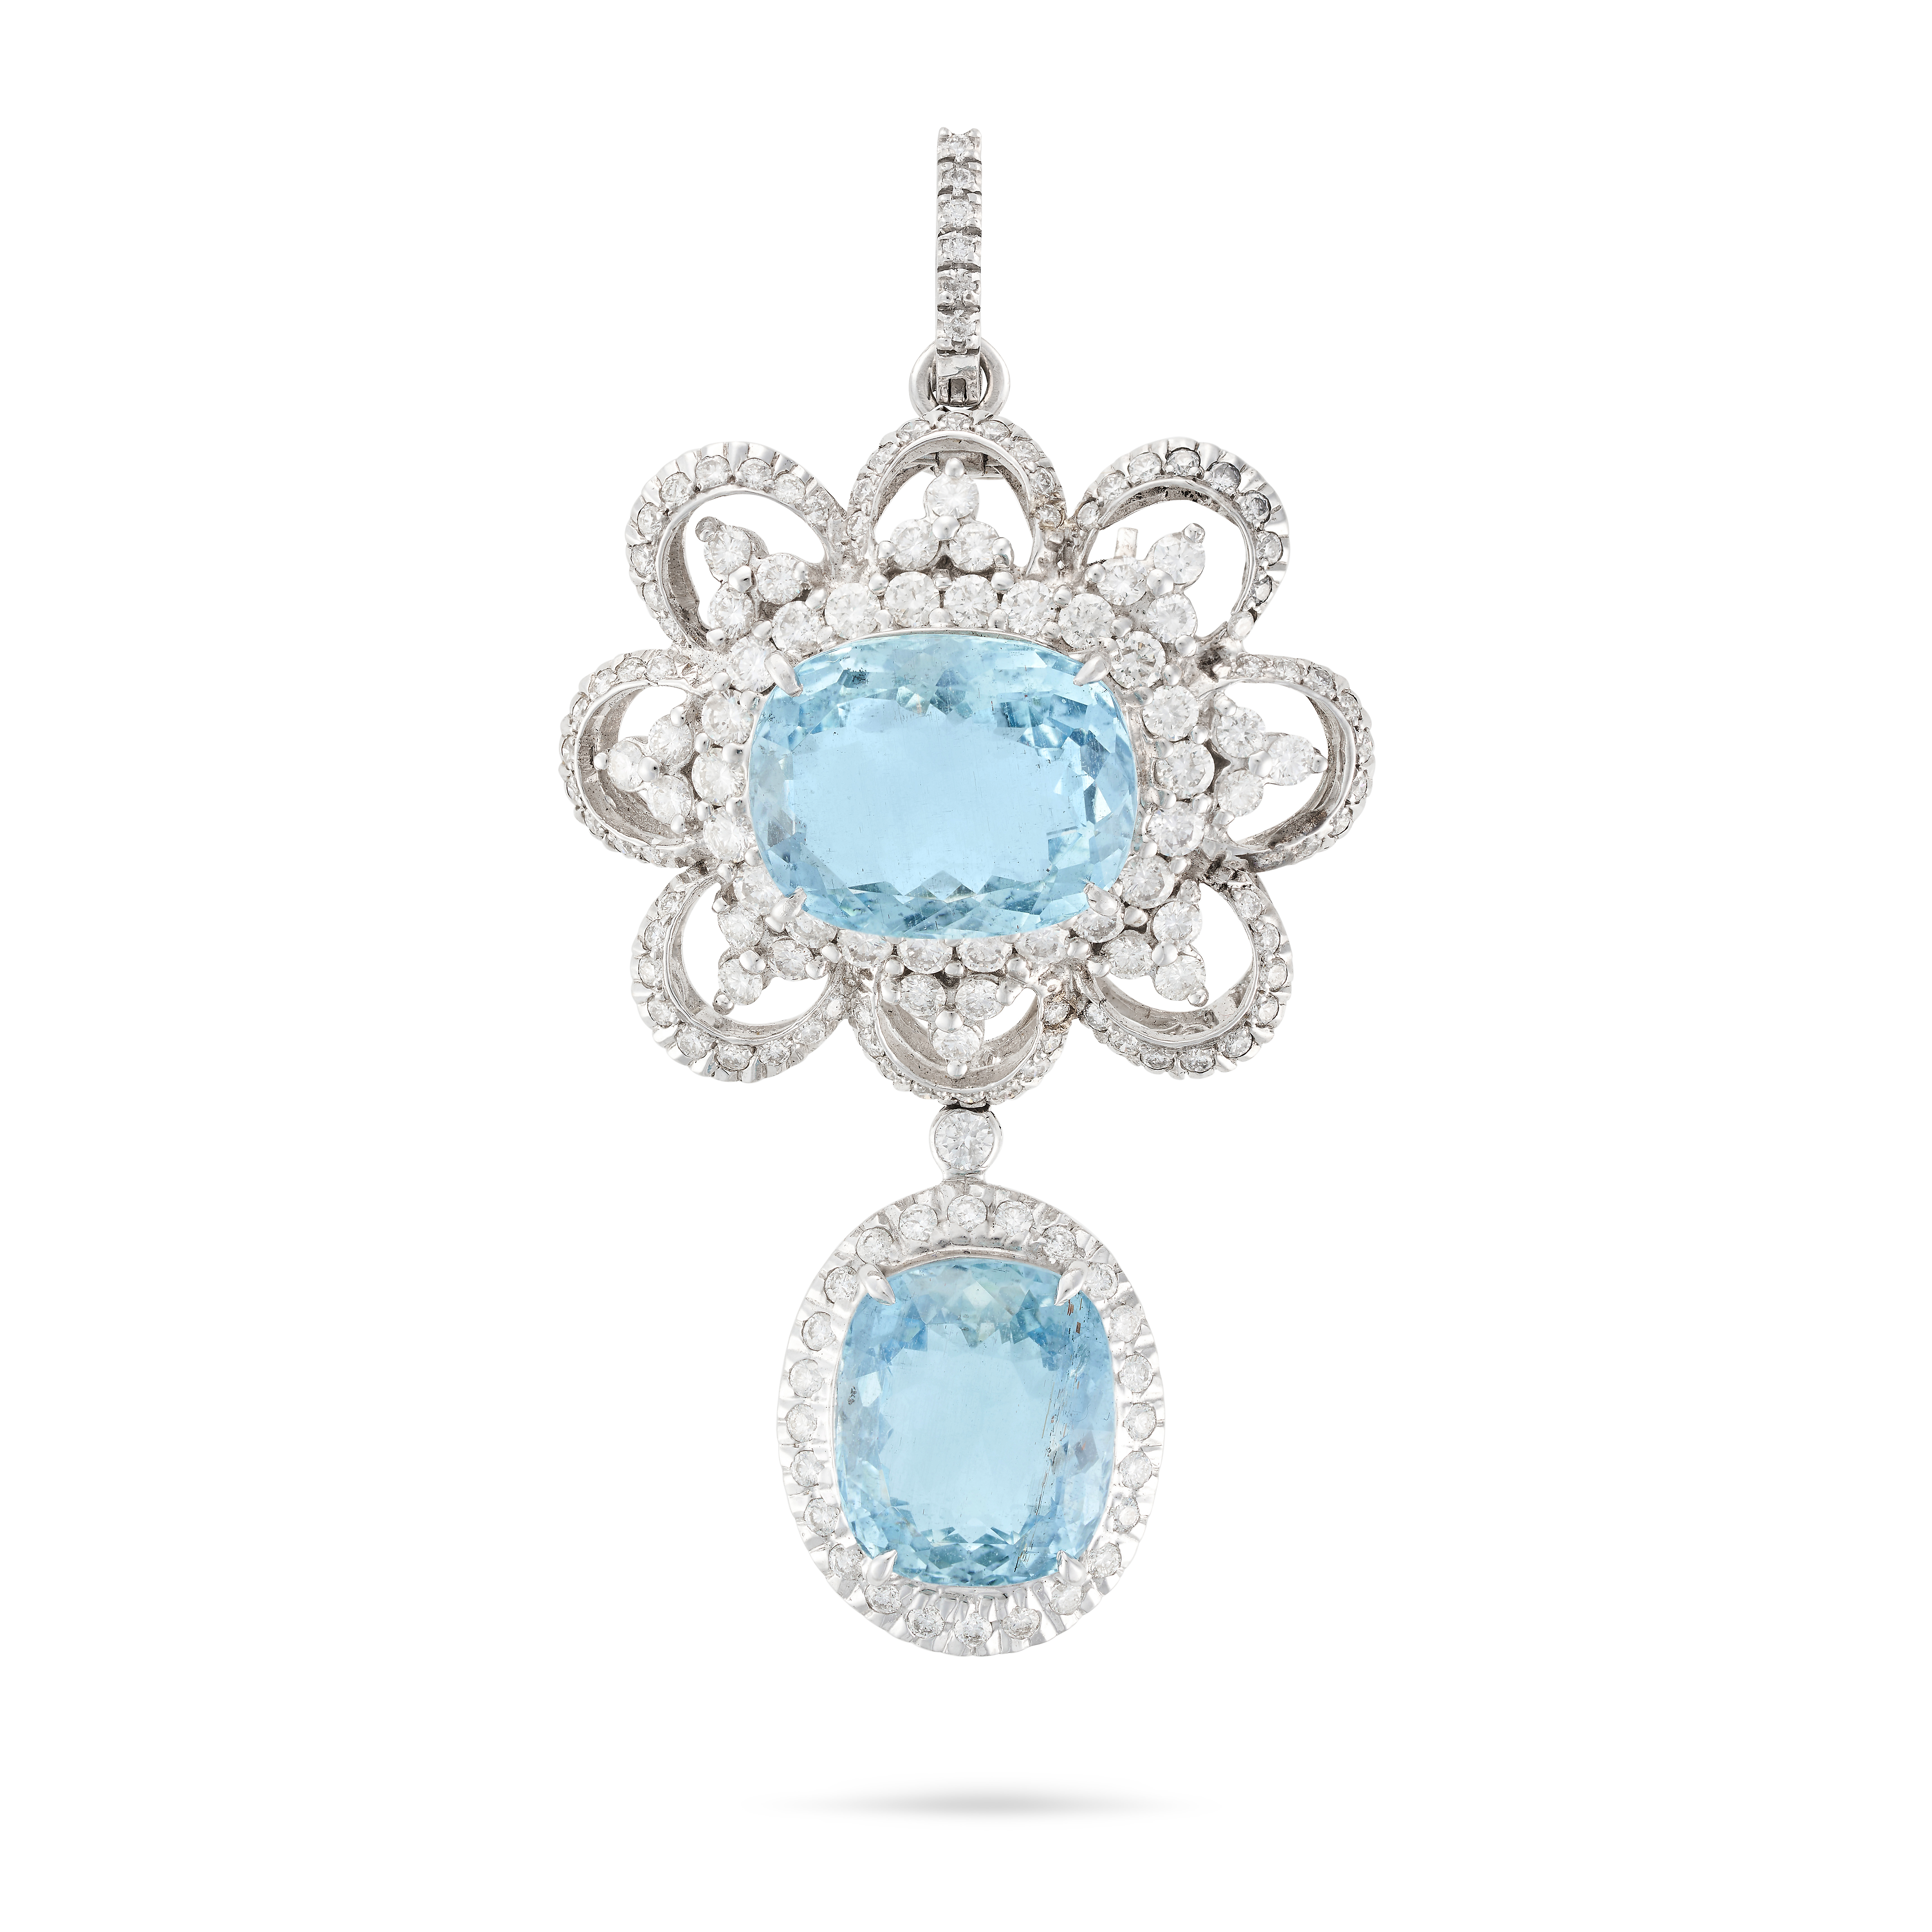 AN AQUAMARINE AND DIAMOND BROOCH / PENDANT set with a cushion cut aquamarine in a stylised border... - Image 2 of 2